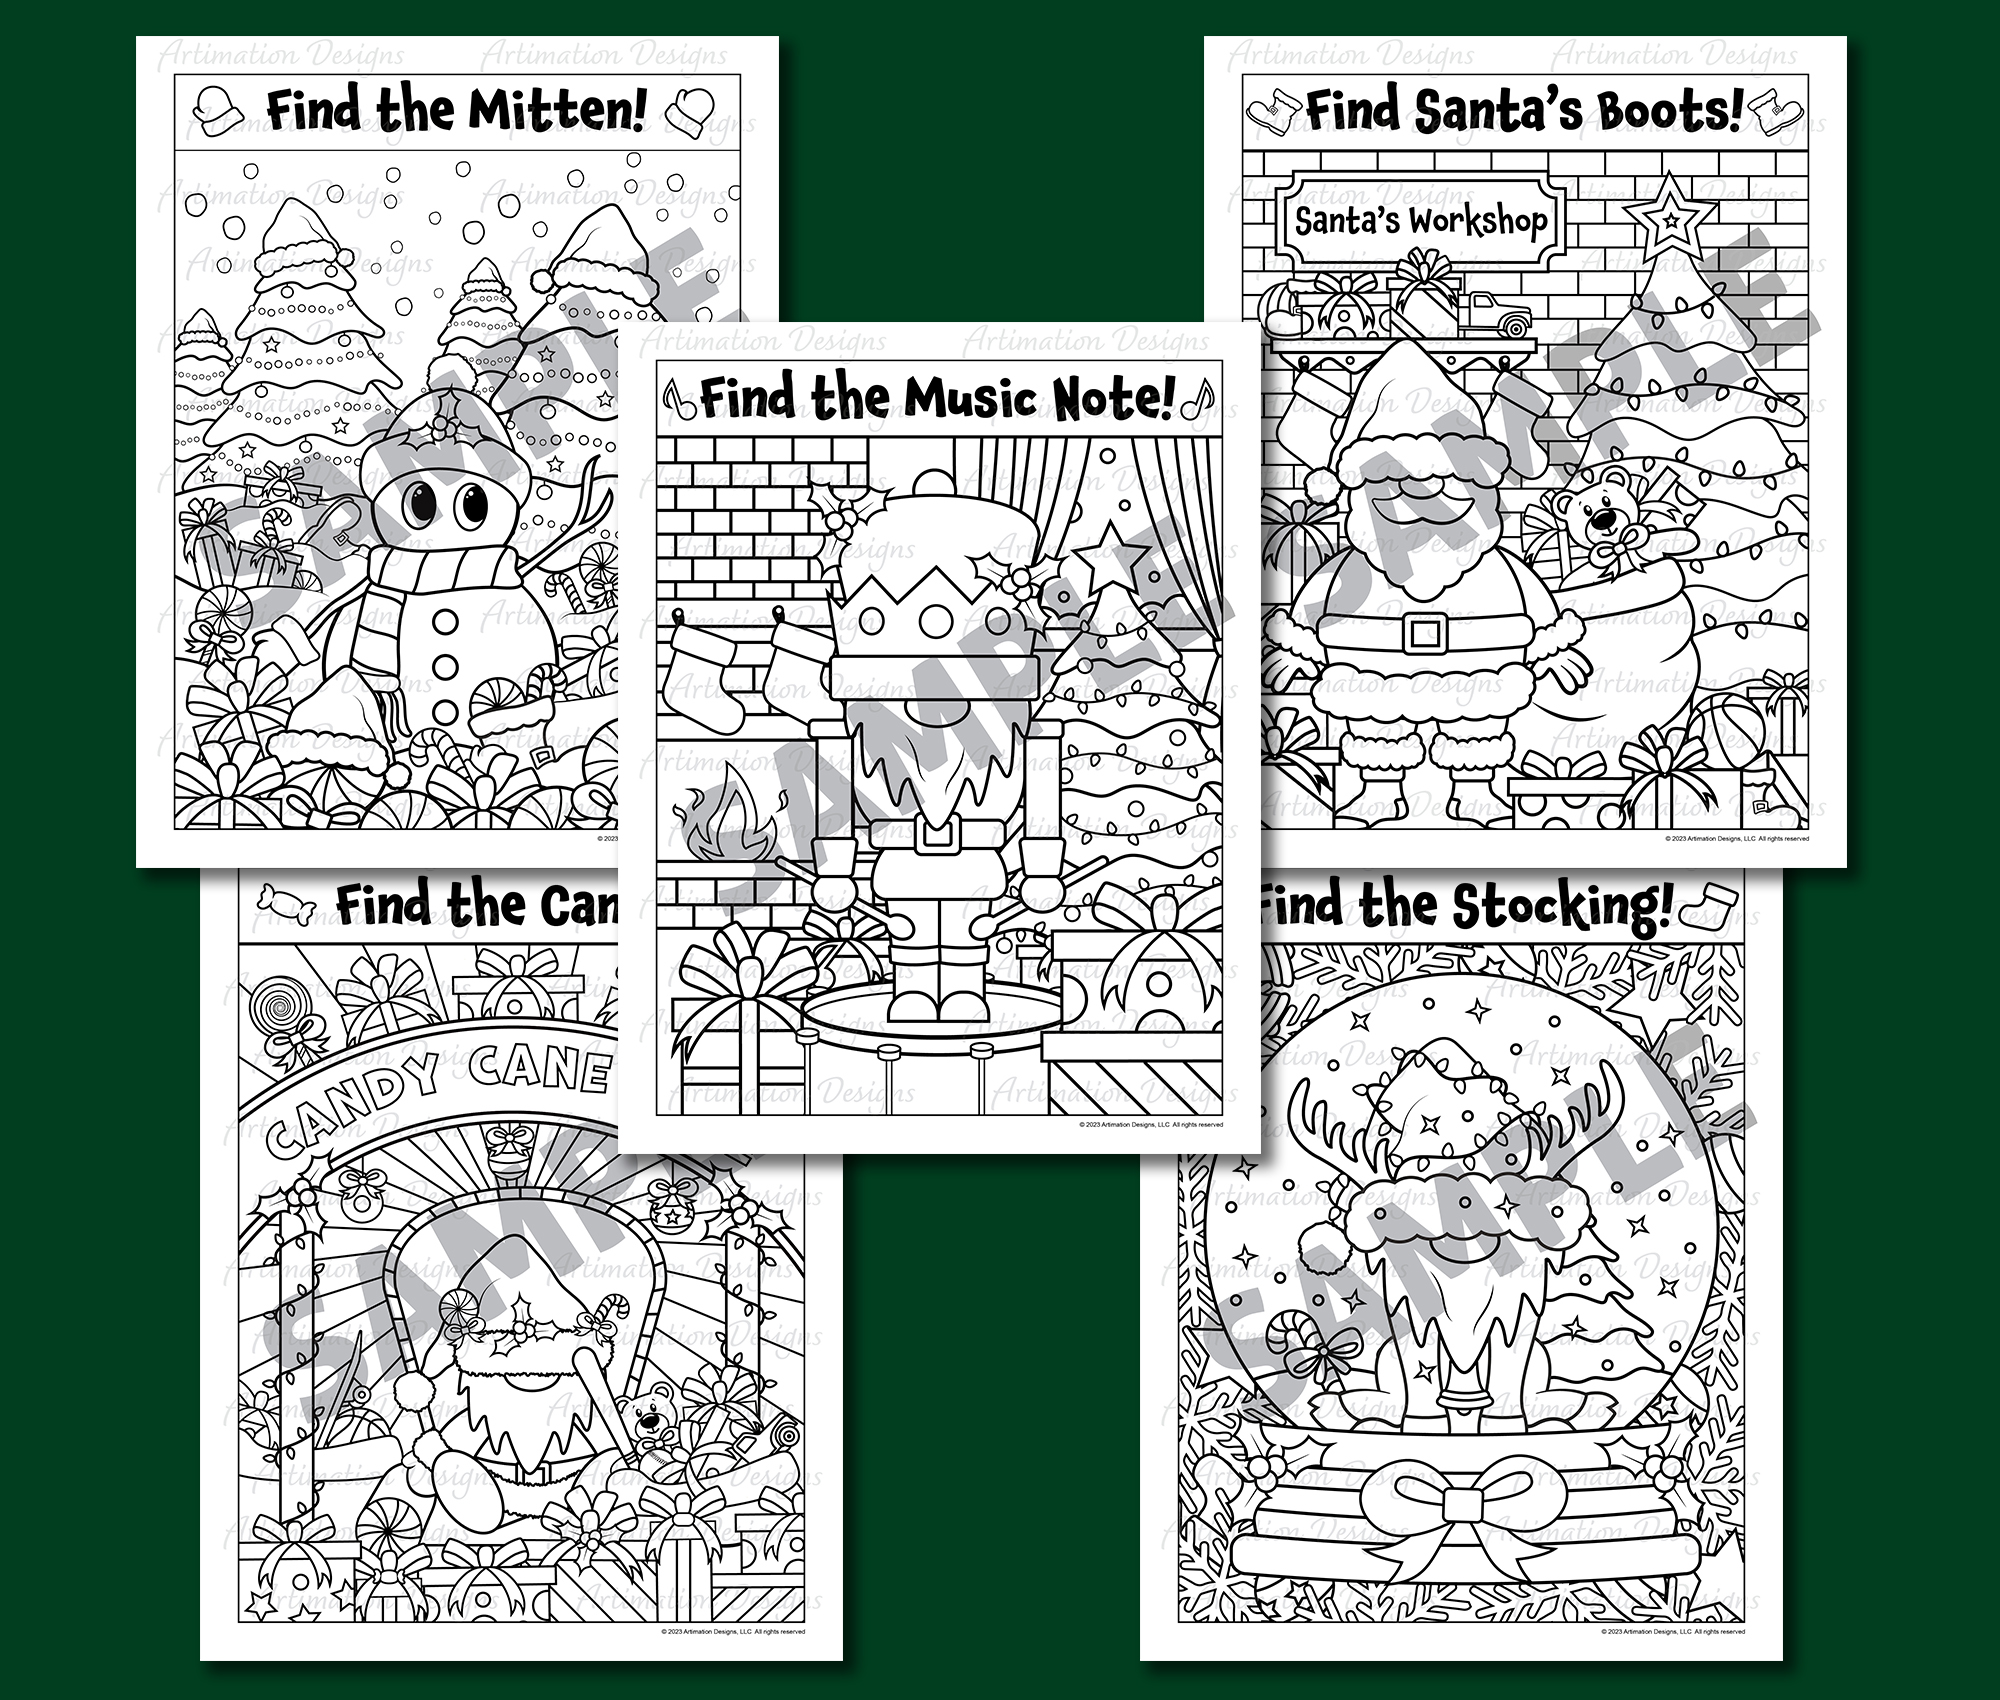 Christmas coloring pages seek and find i spy gnome coloring pages made by teachers